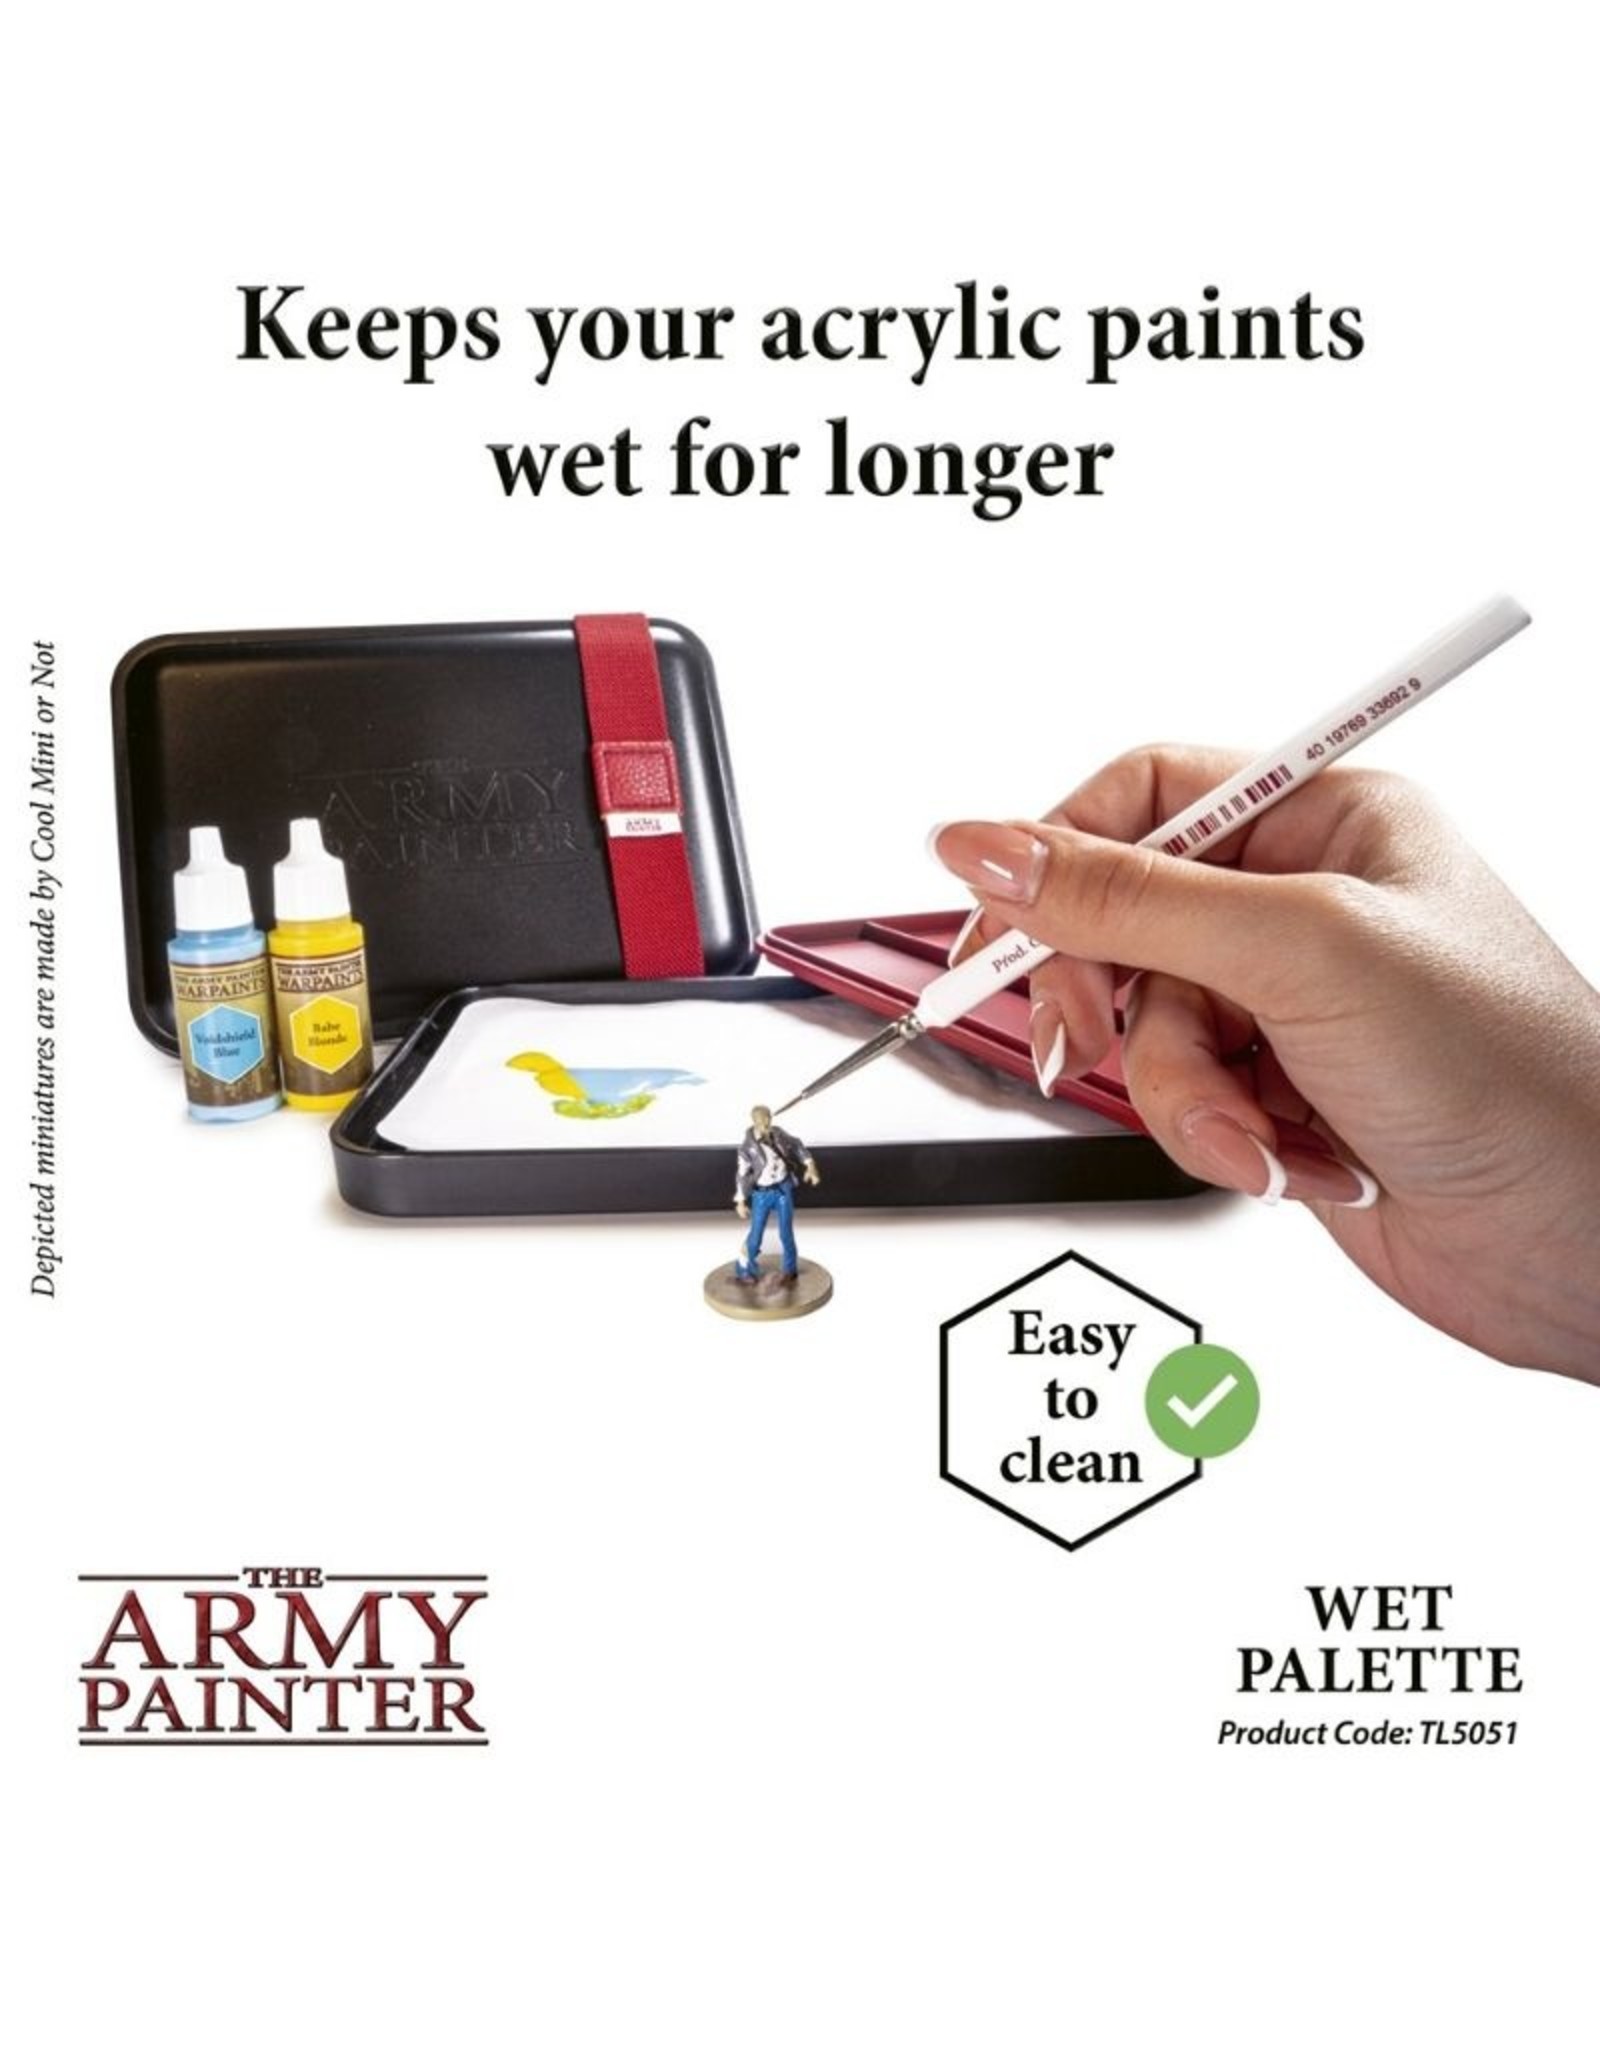 The Army Painter Army Painter Wet Palette